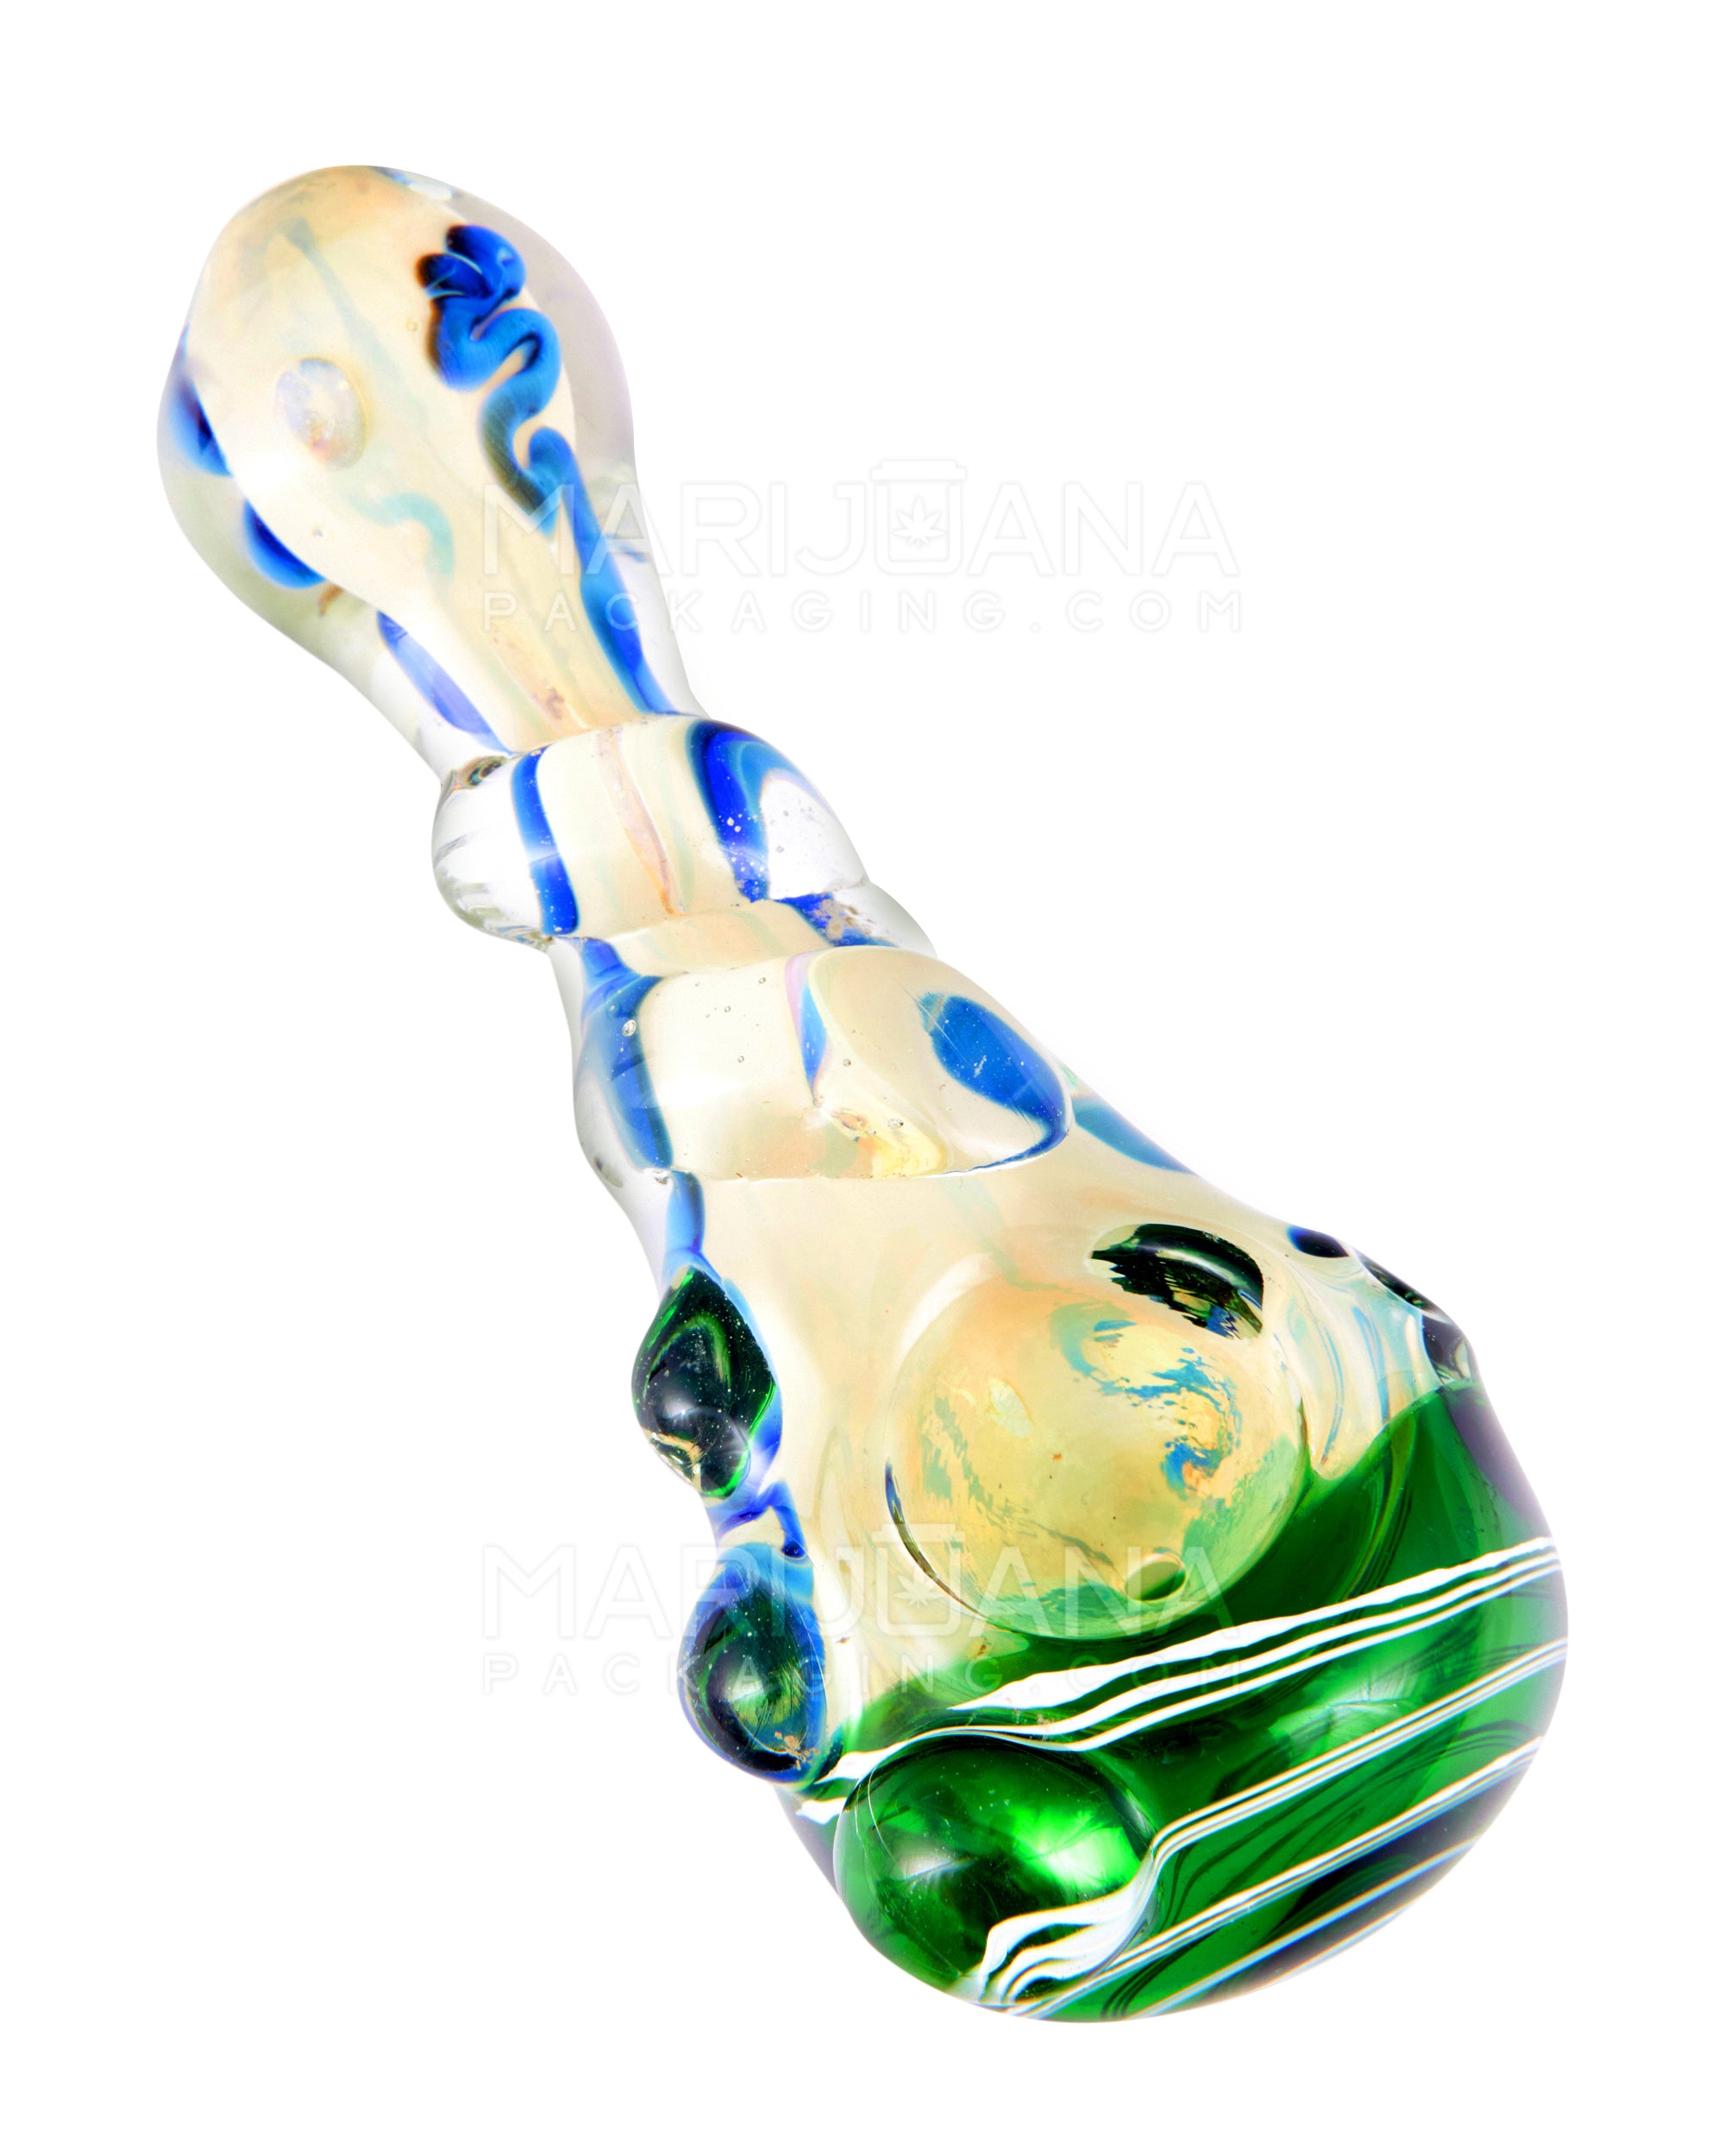 Swirl & Fumed Bulged Spoon Hand Pipe w/ Double Knockers & Spiral Head | 5in Long - Glass - Assorted - 1